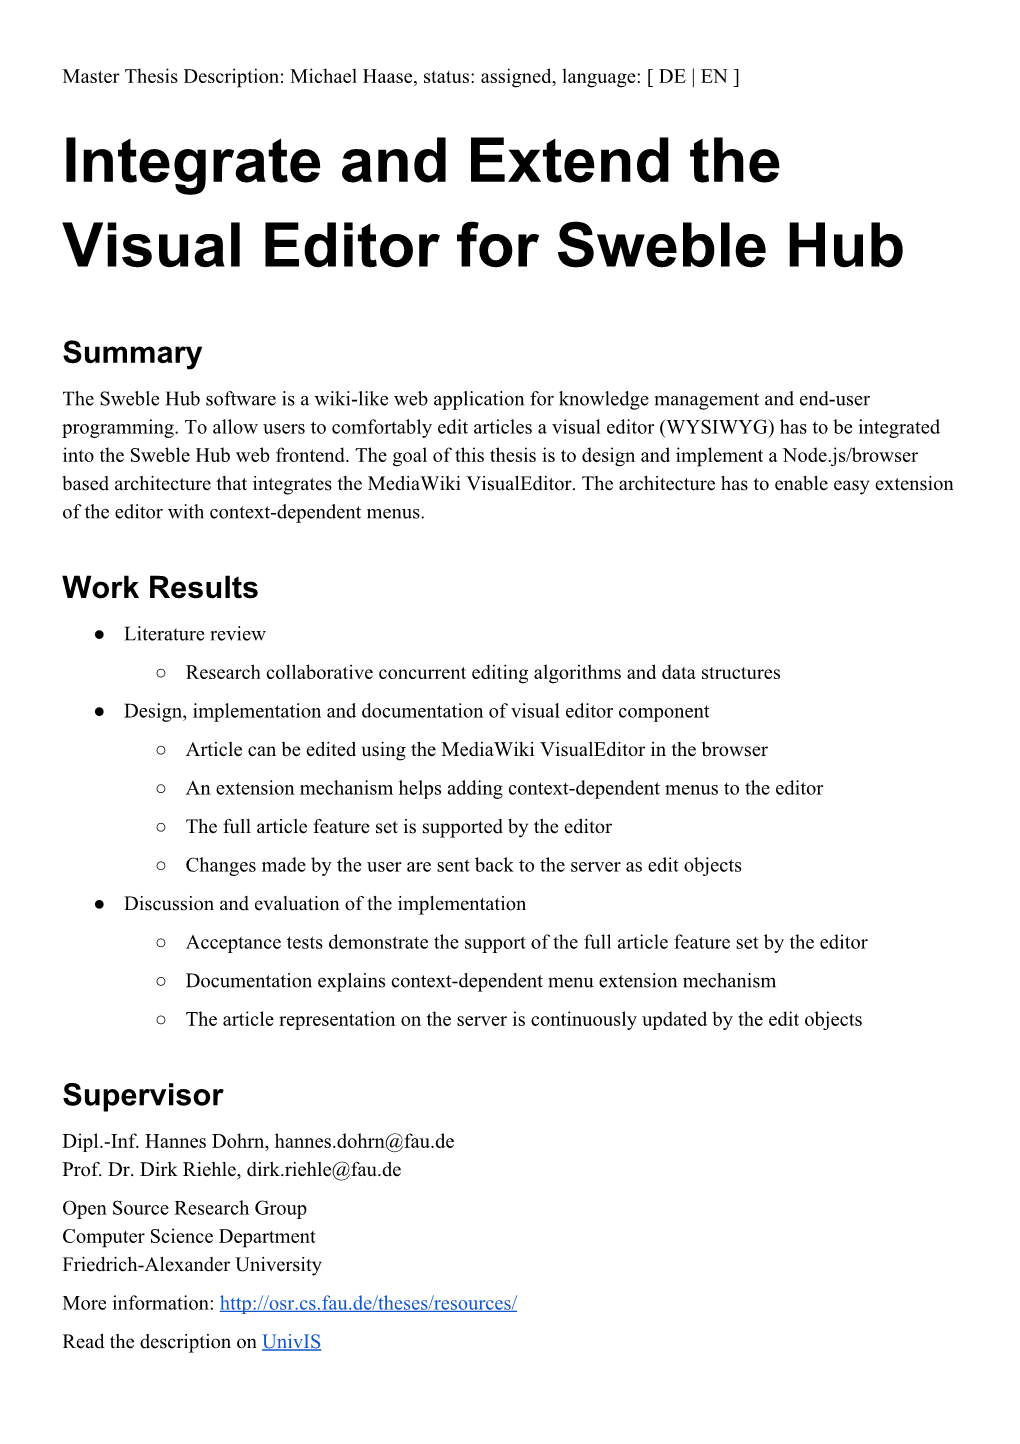 Integrate and Extend the Visual Editor for Sweble Hub